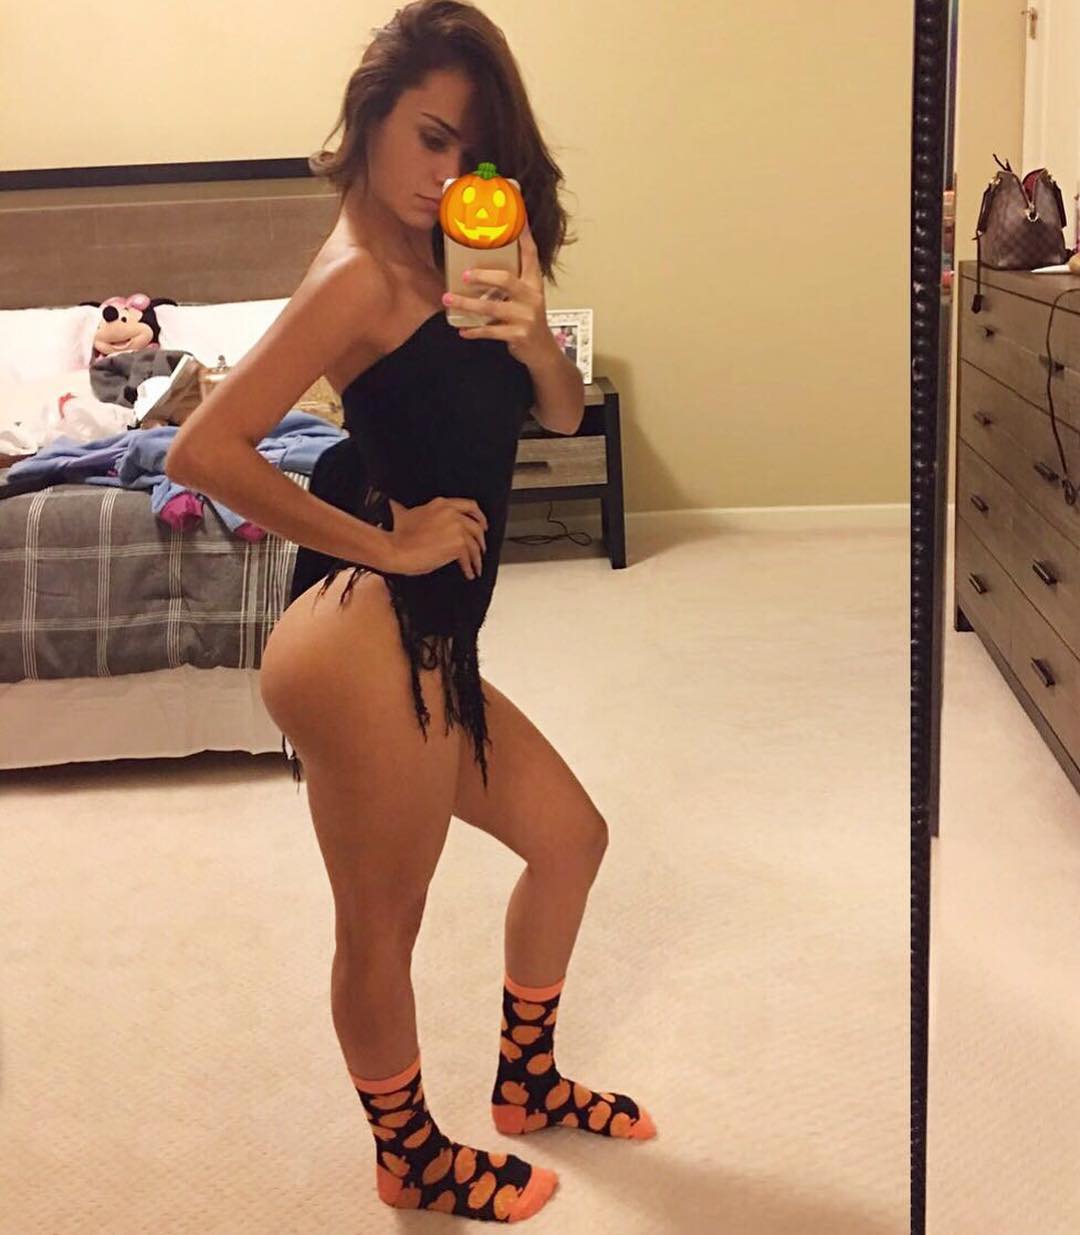 75+ Hot Pictures Of Yanet Garcia Are Just Too Hot to Handle | Best Of Comic Books